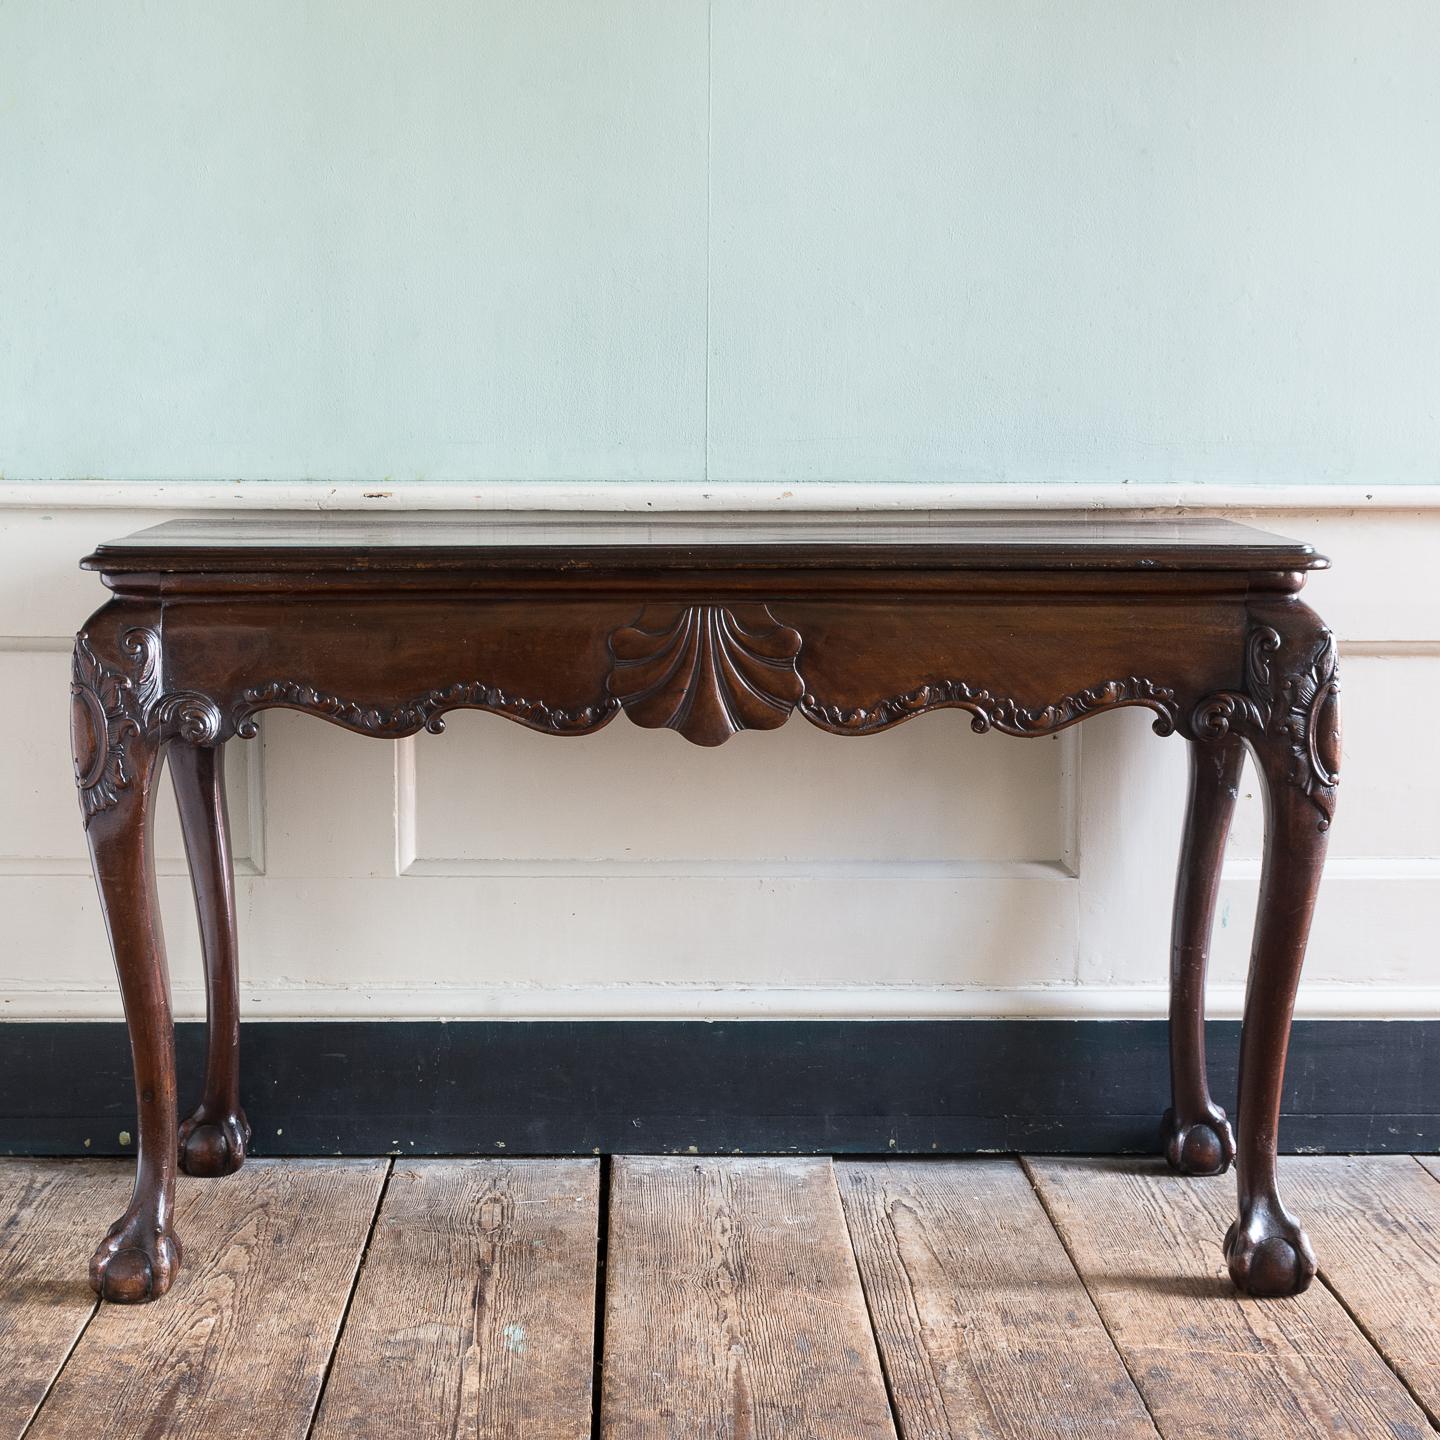 A 19th century Irish mahogany serving table in the George II style, with double moulded rectangular top above serpentine shaped frieze with S and C-scroll carved frame centred by shell detail, the cabriole legs with carved leaf and foliate designs